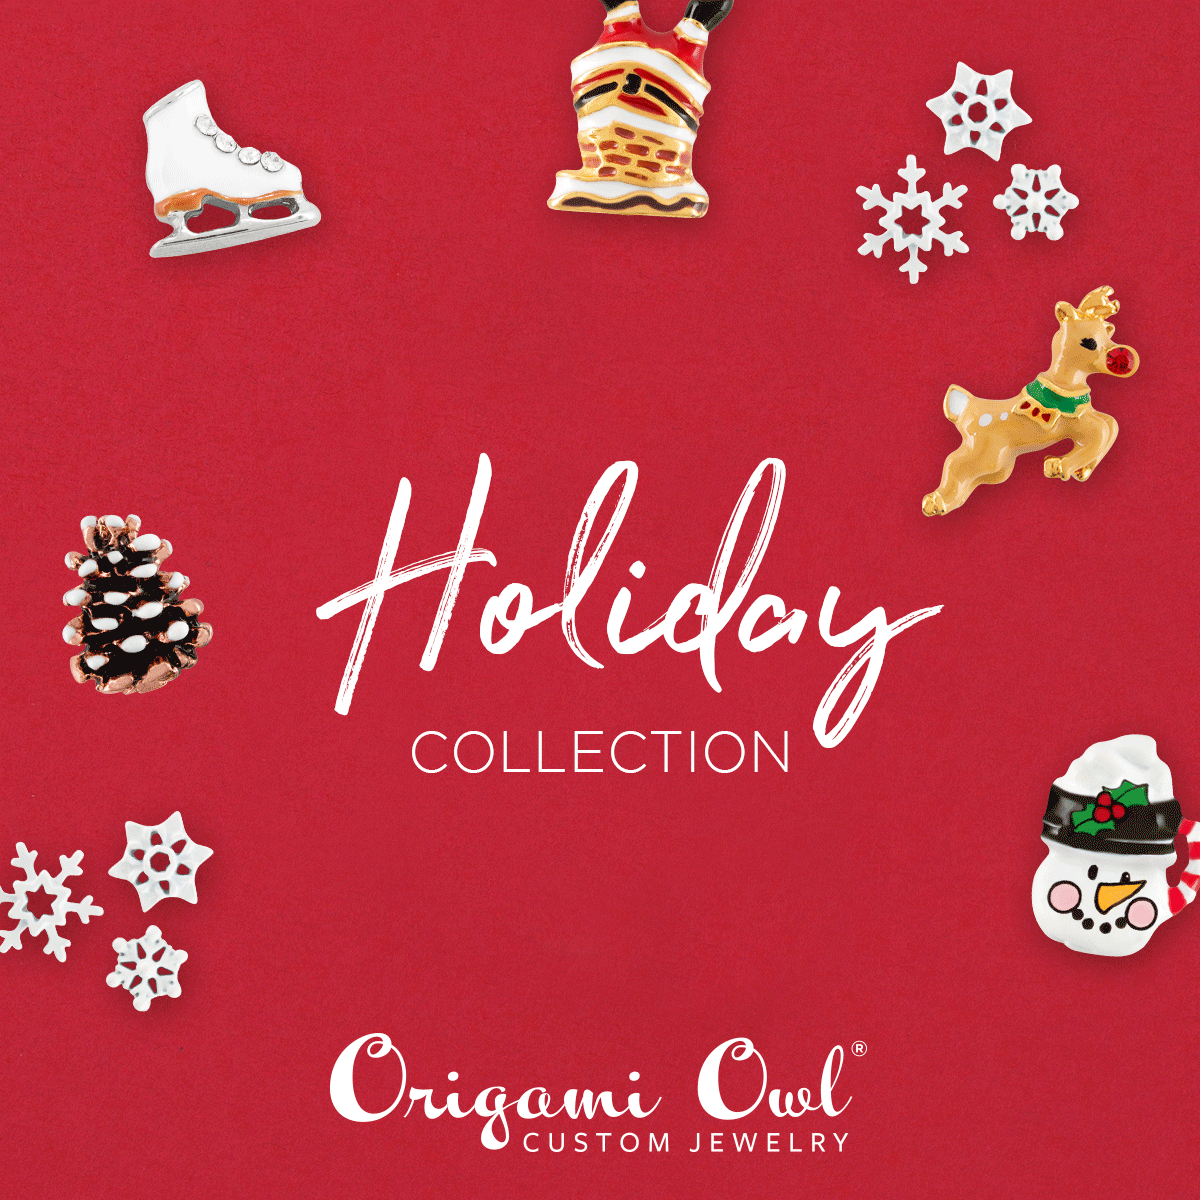 Origami Owl Christmas Charms Introducing The Beautiful Origami Owl Holiday 2018 Collection New